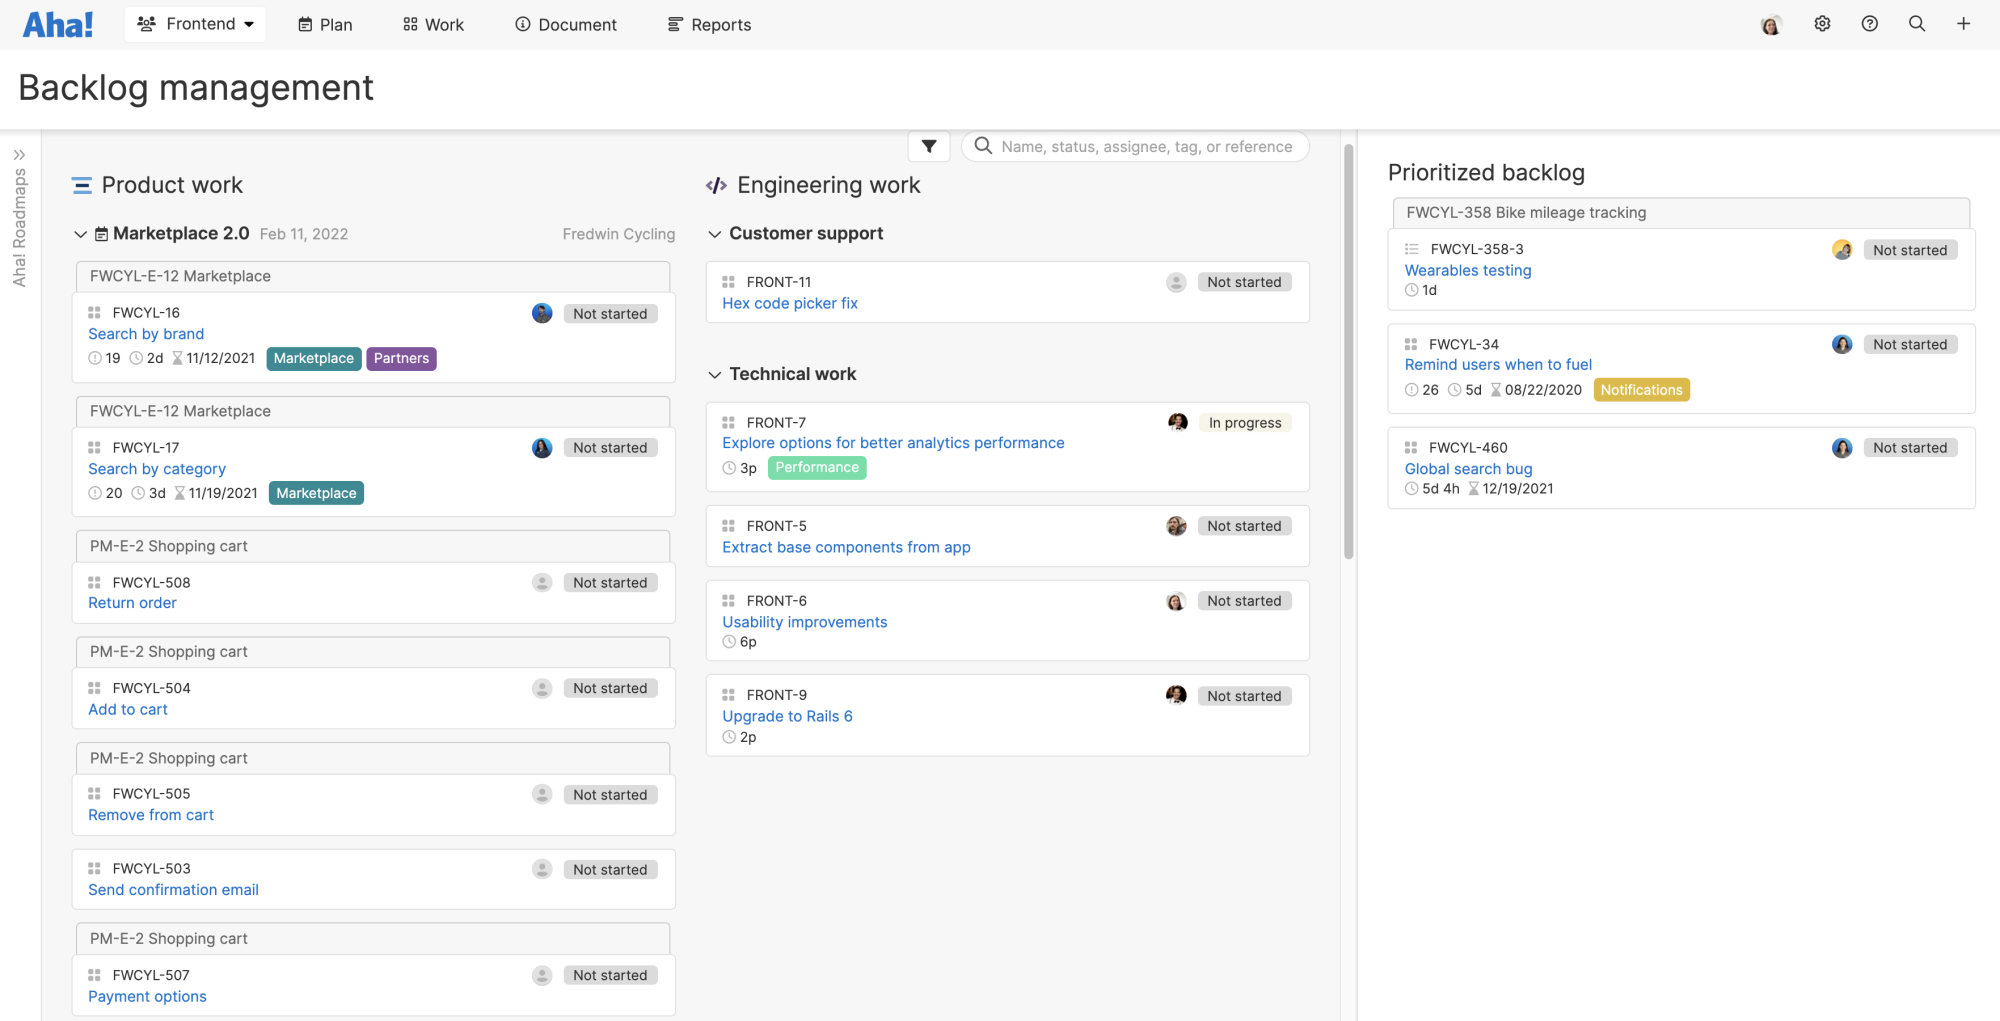 See product and engineering work together in a single view on the backlog management page.